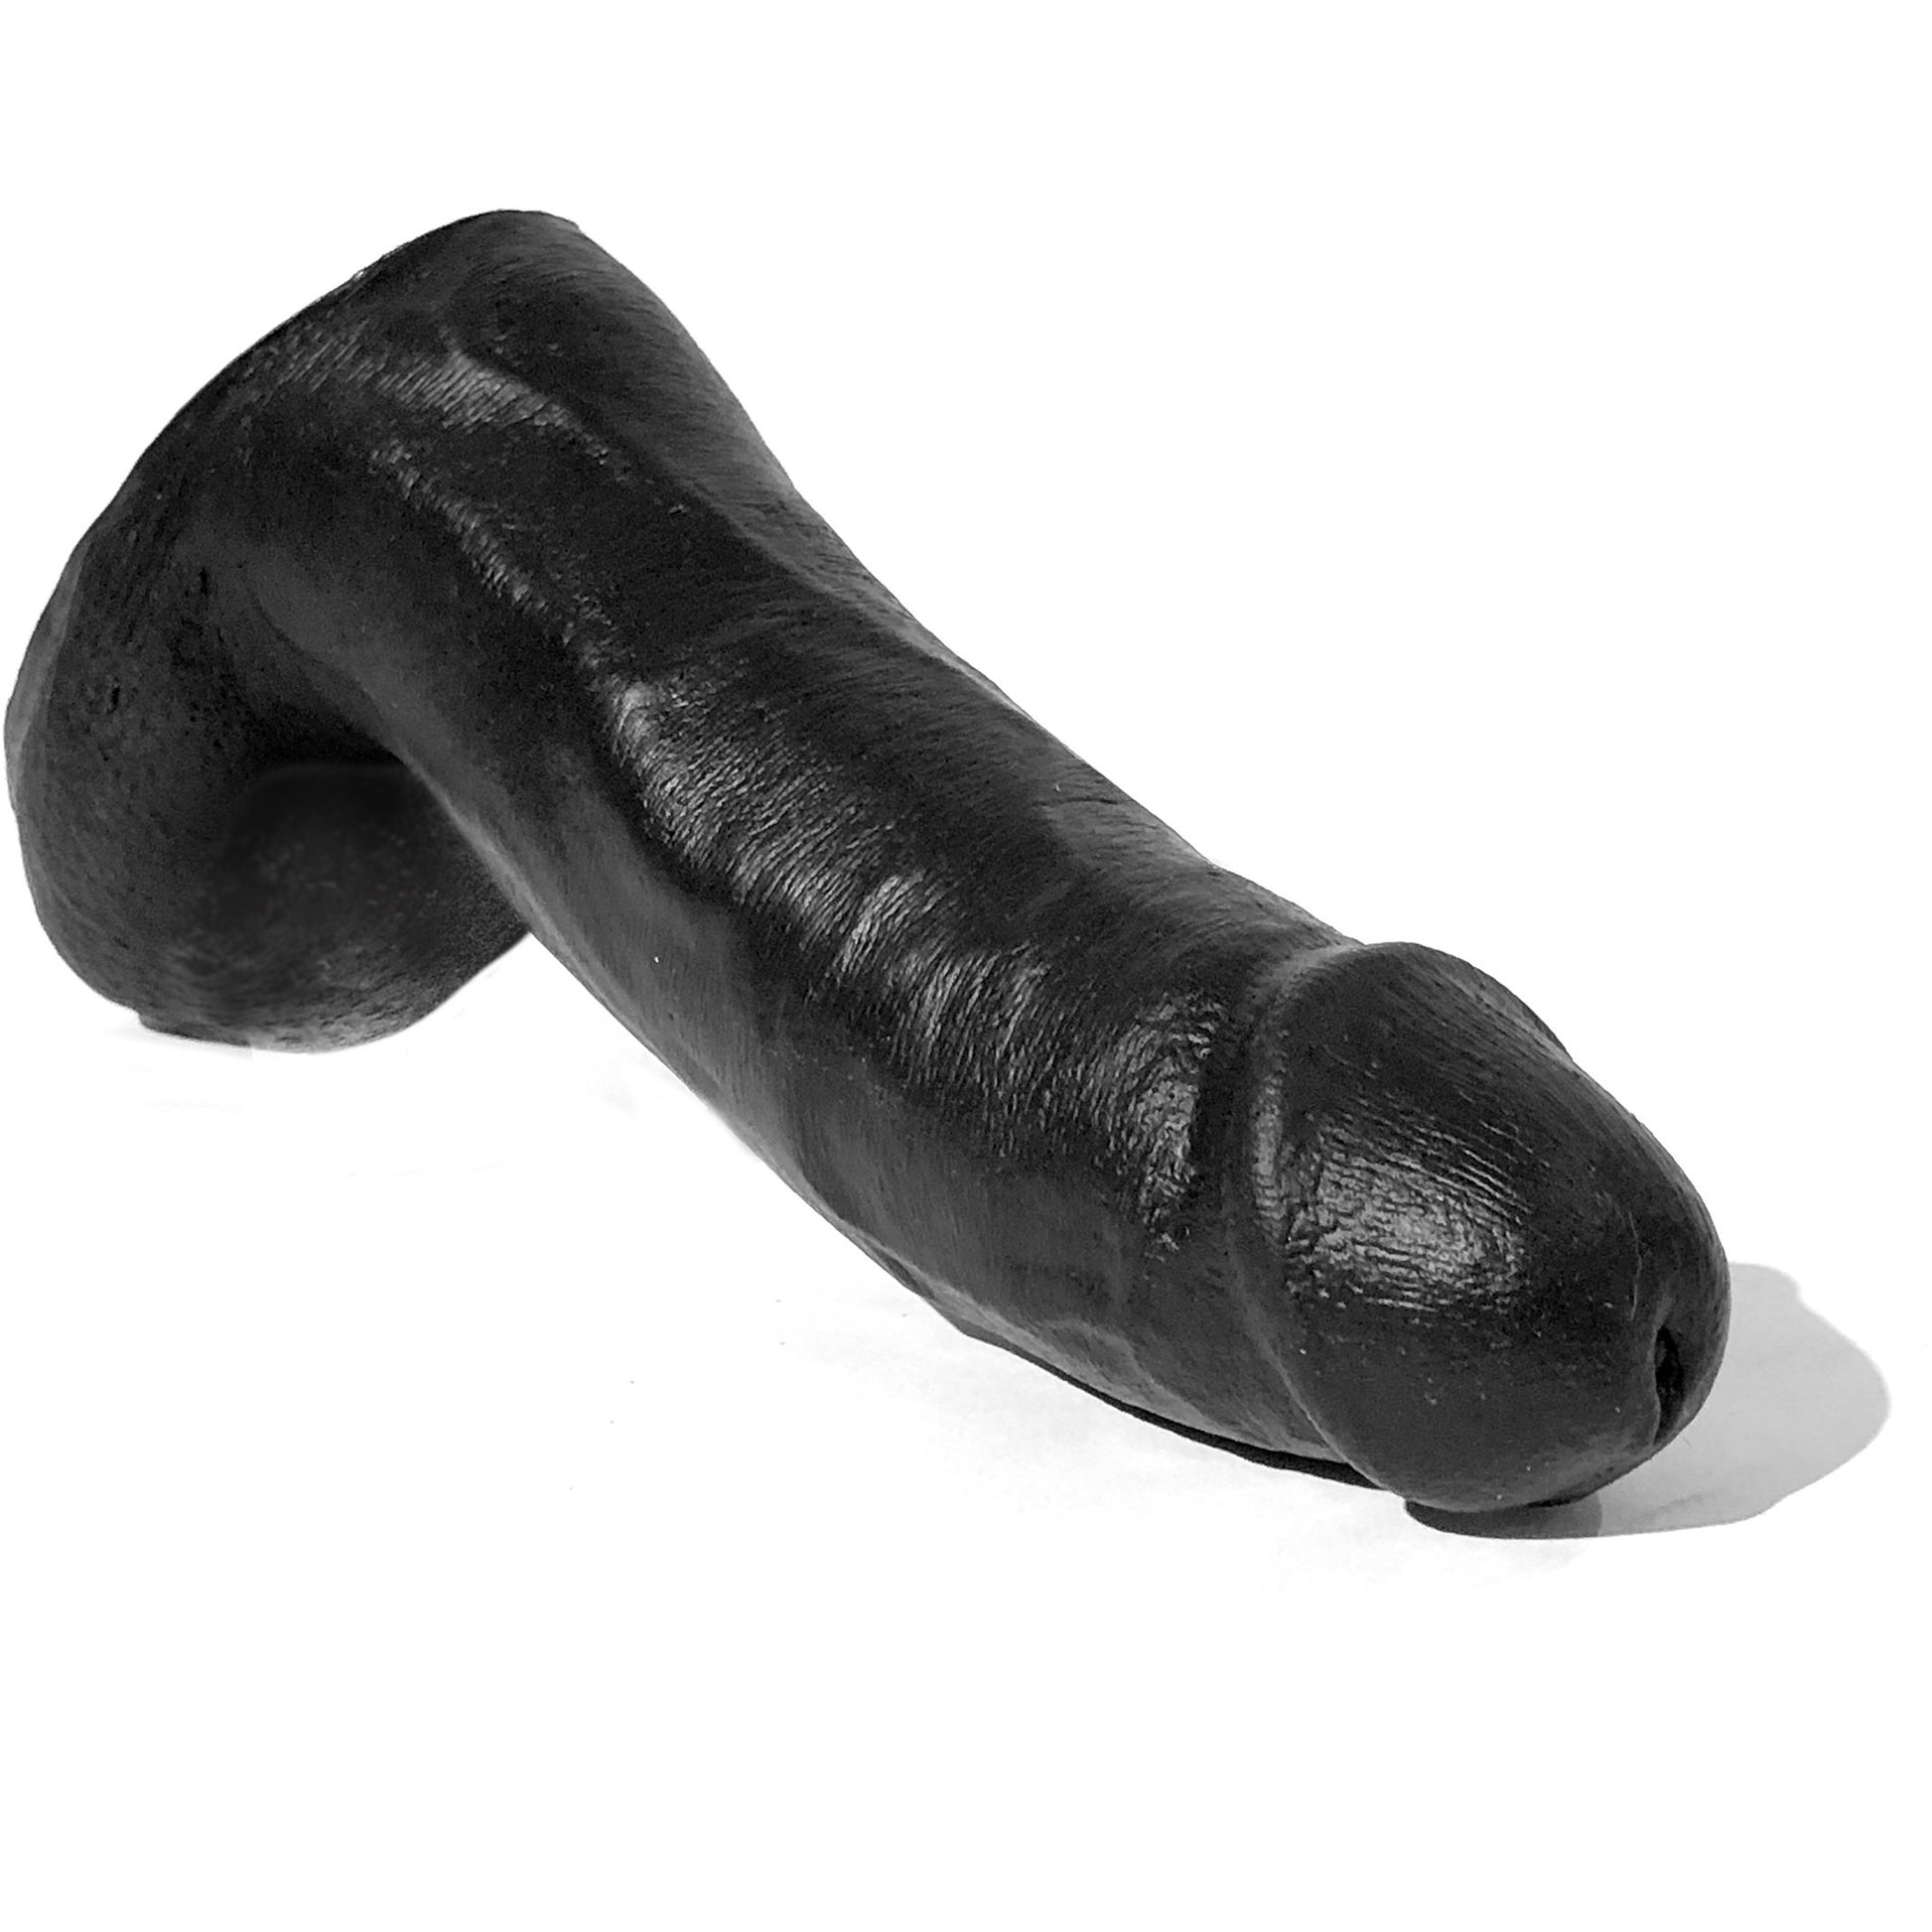 Cock 8 inch - C1RB2B